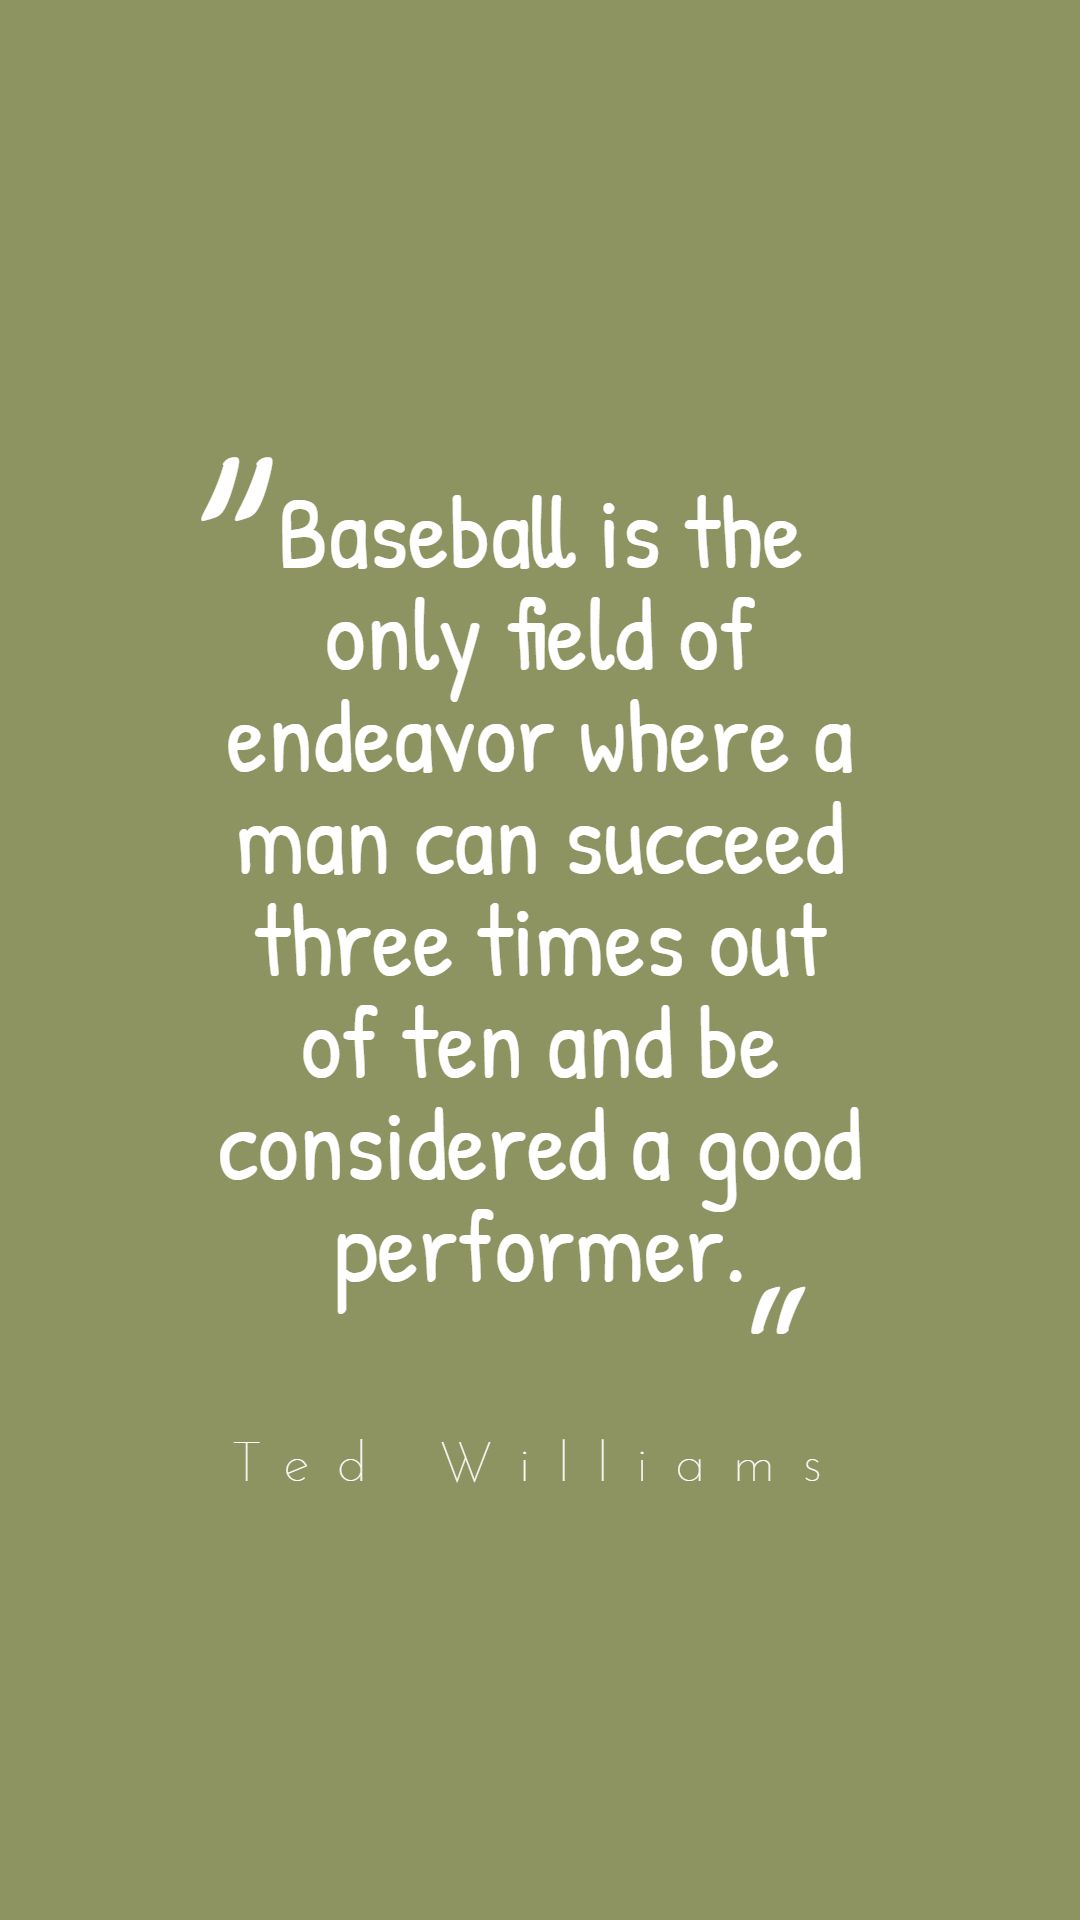 Baseball is the only field of endeavor where a man can succeed three times out of ten and be considered a good performer.